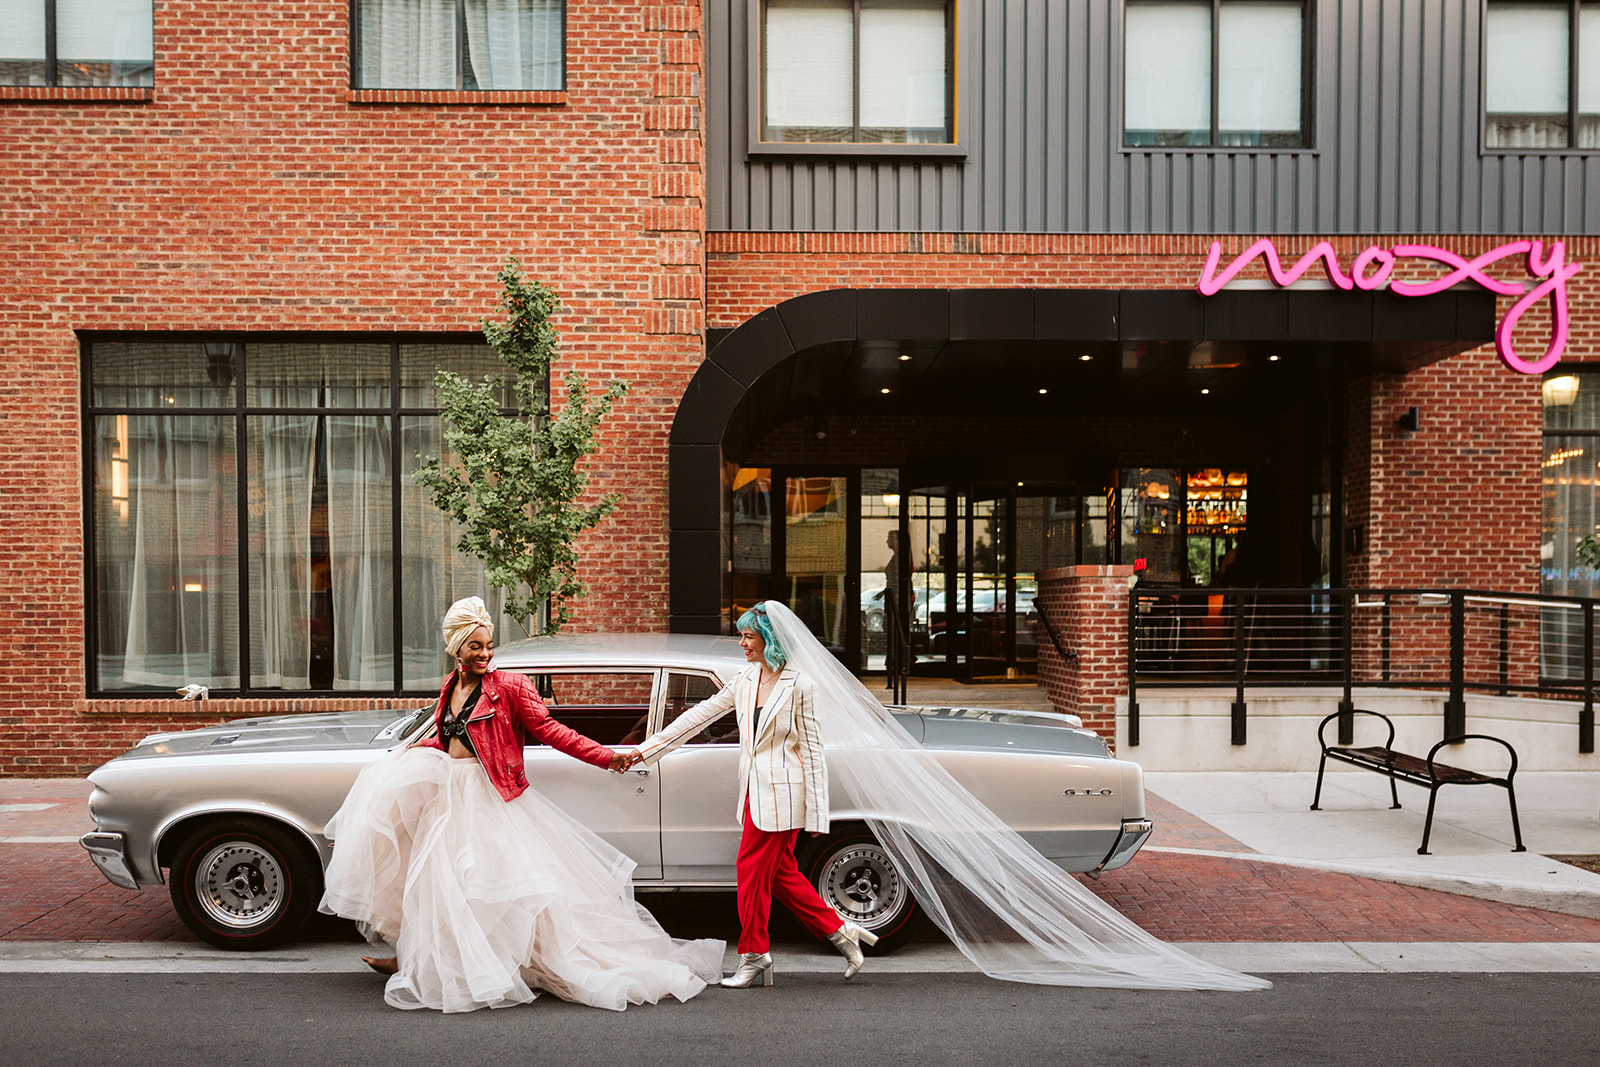 The brides walk hand-in-hand down the street outside Moxy Chattanooga.